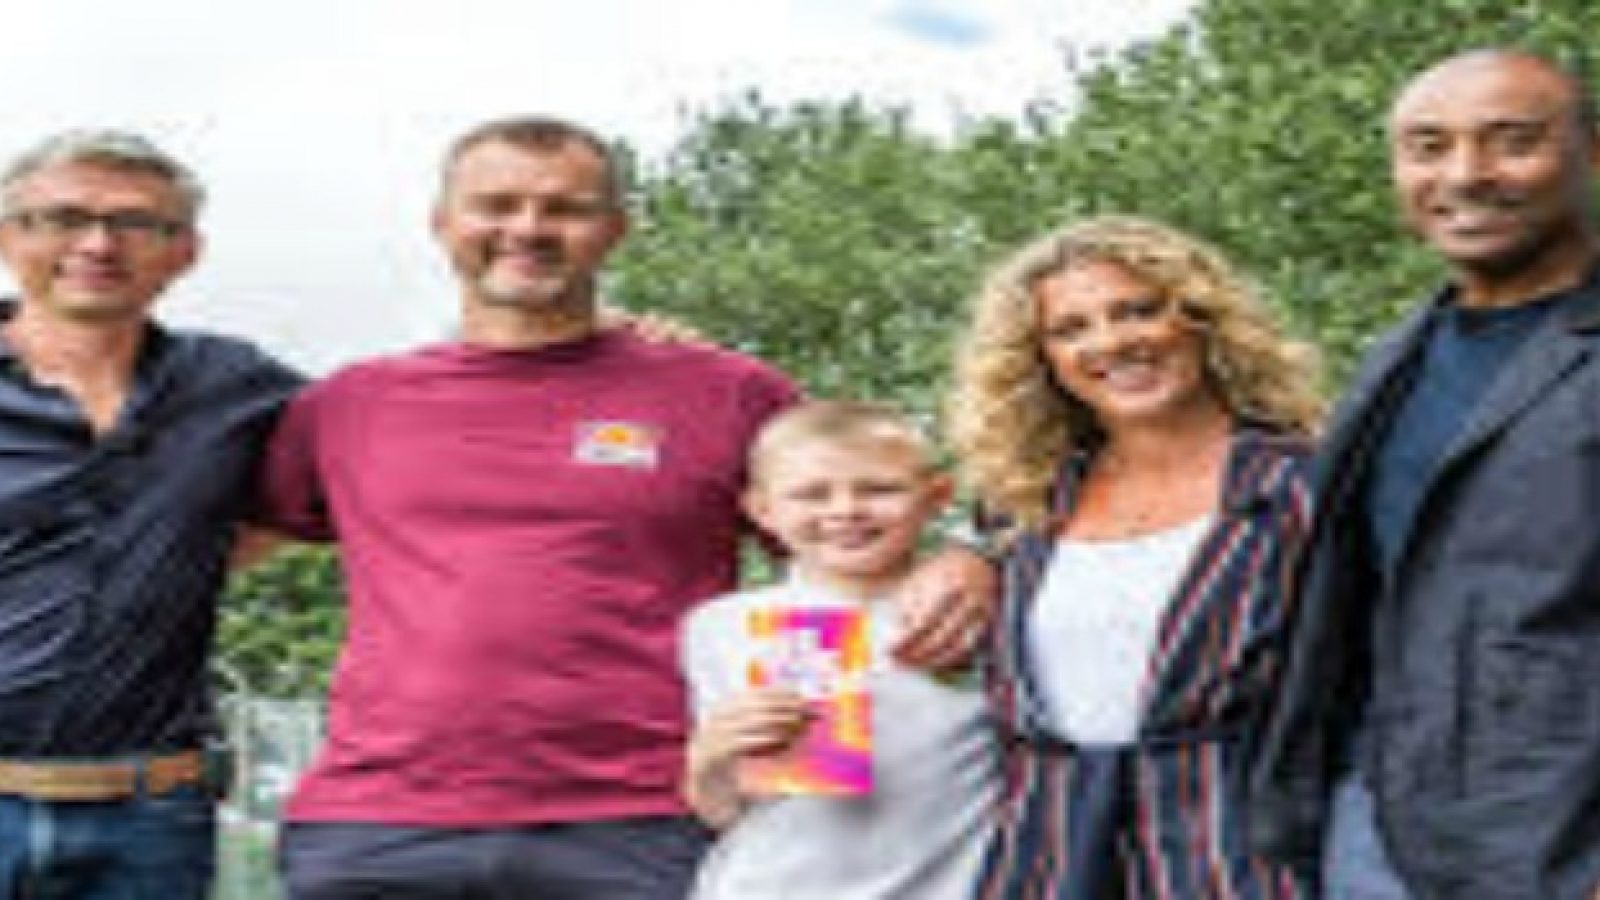 Jonathan Edwards, Sally Gunnell and Colin Jackson travel around Southport delivering London 2017 Tickets